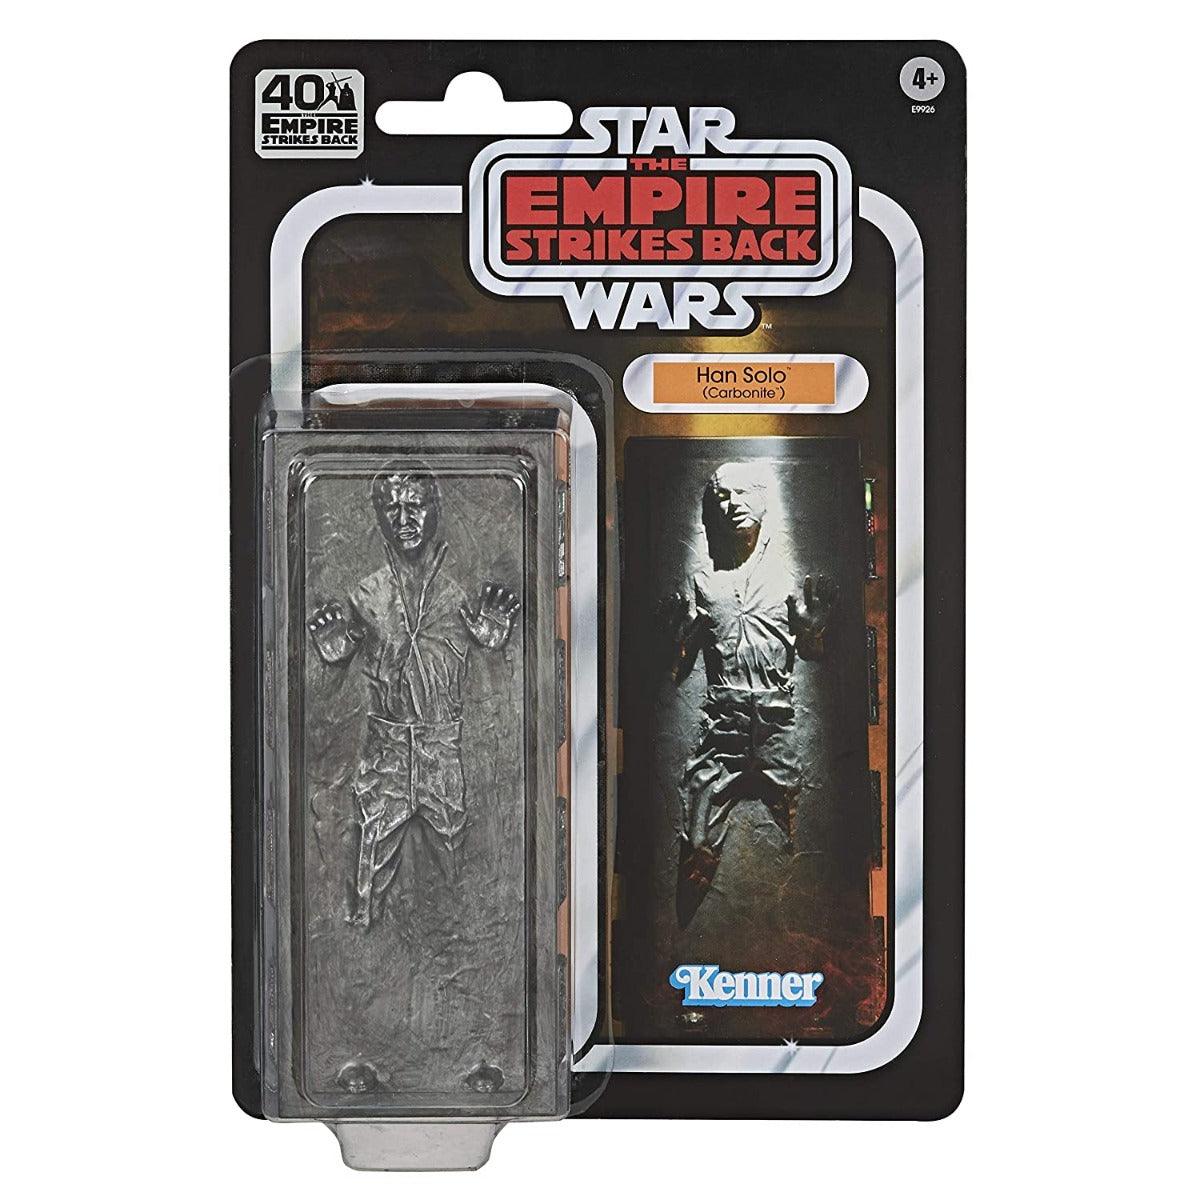 Star Wars The Black Series Han Solo (Carbonite) 6-Inch-Scale: The Empire Strikes Back 40th Anniversary Collectible Figure